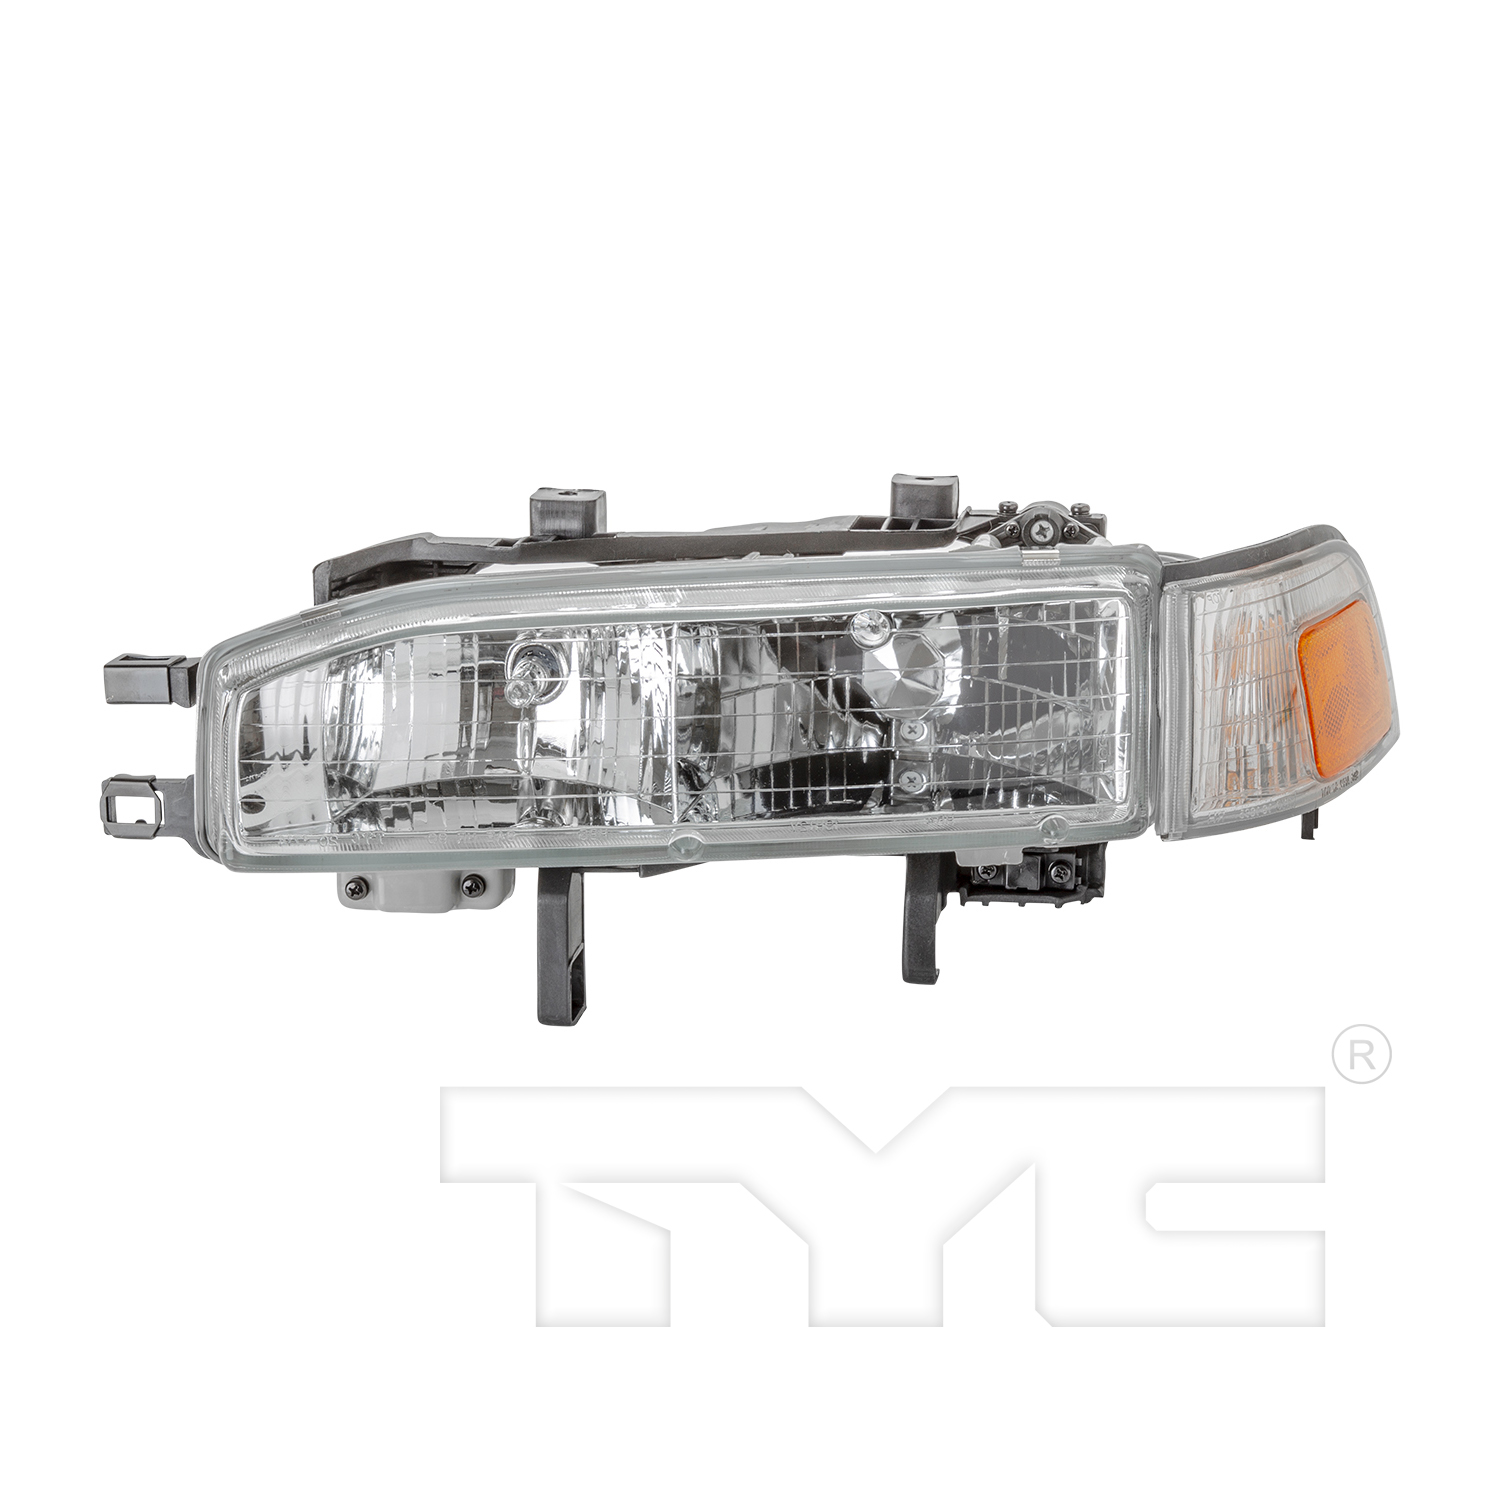 Aftermarket HEADLIGHTS for HONDA - ACCORD, ACCORD,90-91,LT Headlamp assy composite